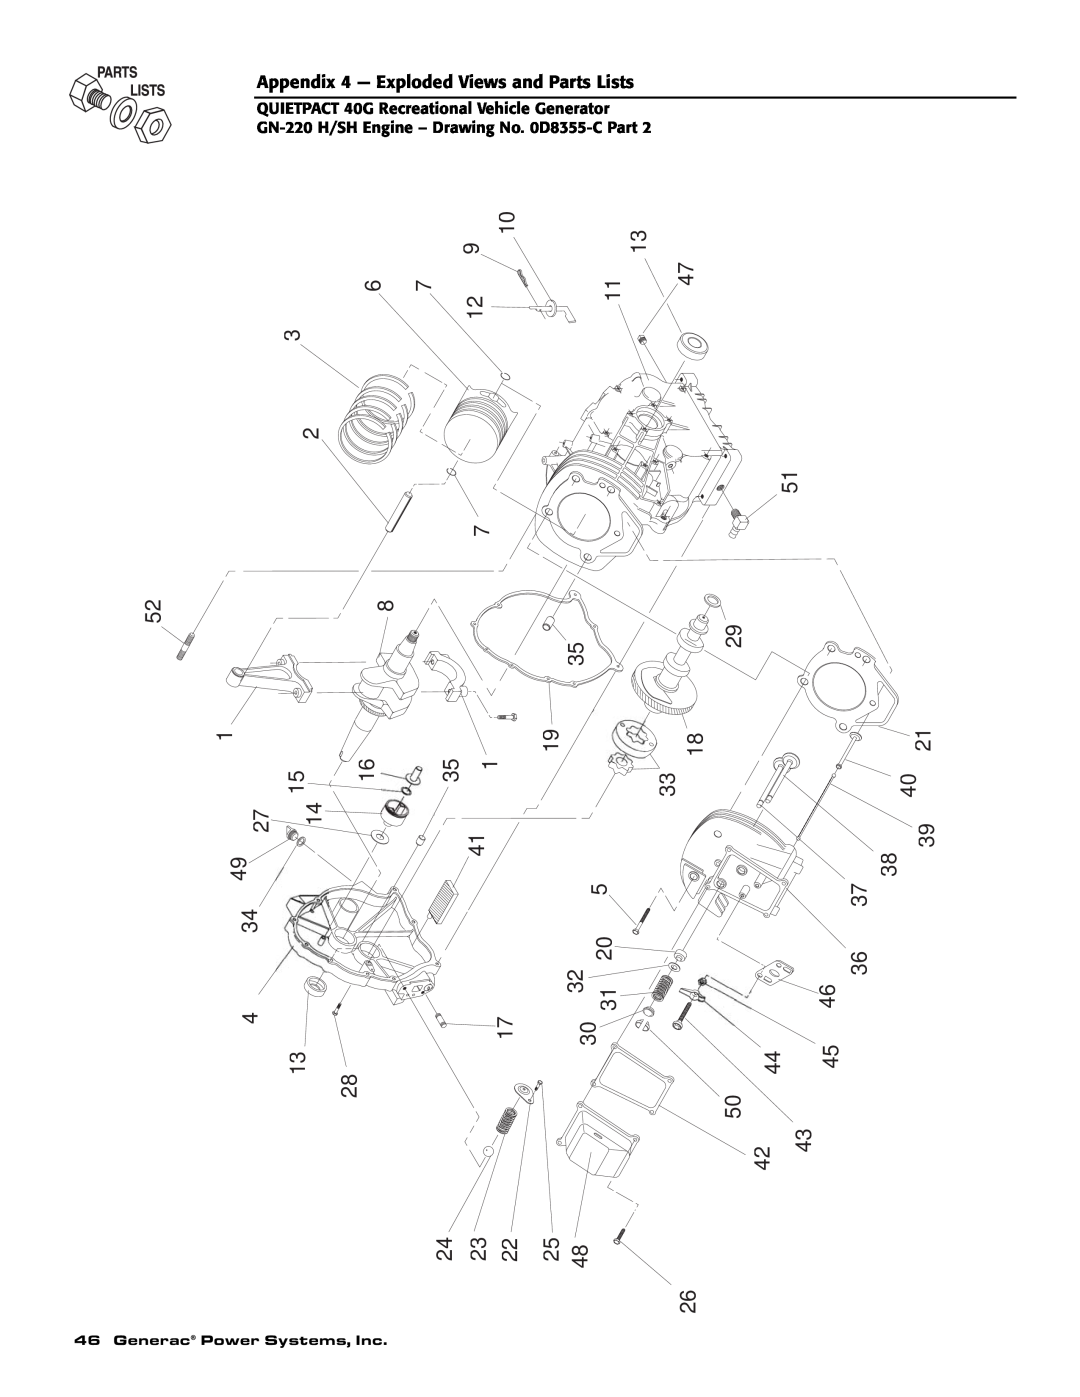 Generac 004700-0 owner manual Appendix 4 - Exploded Views and Parts Lists, Generac Power Systems, Inc 